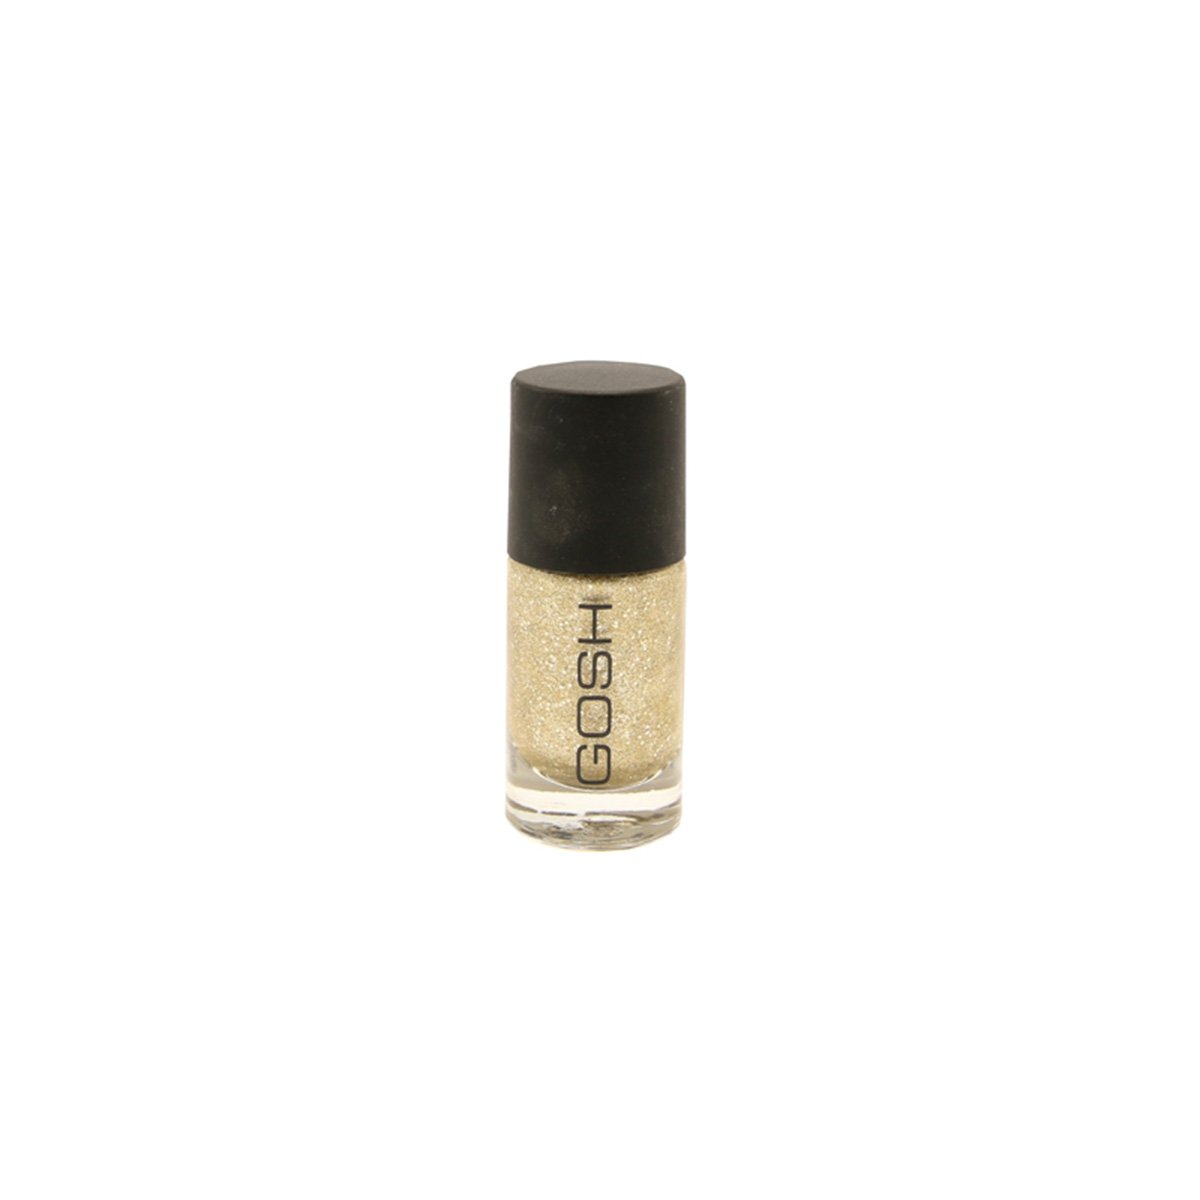 Gosh - Frosted Nail Lacquer - 02 - Frosted Gold - Highfy.pk